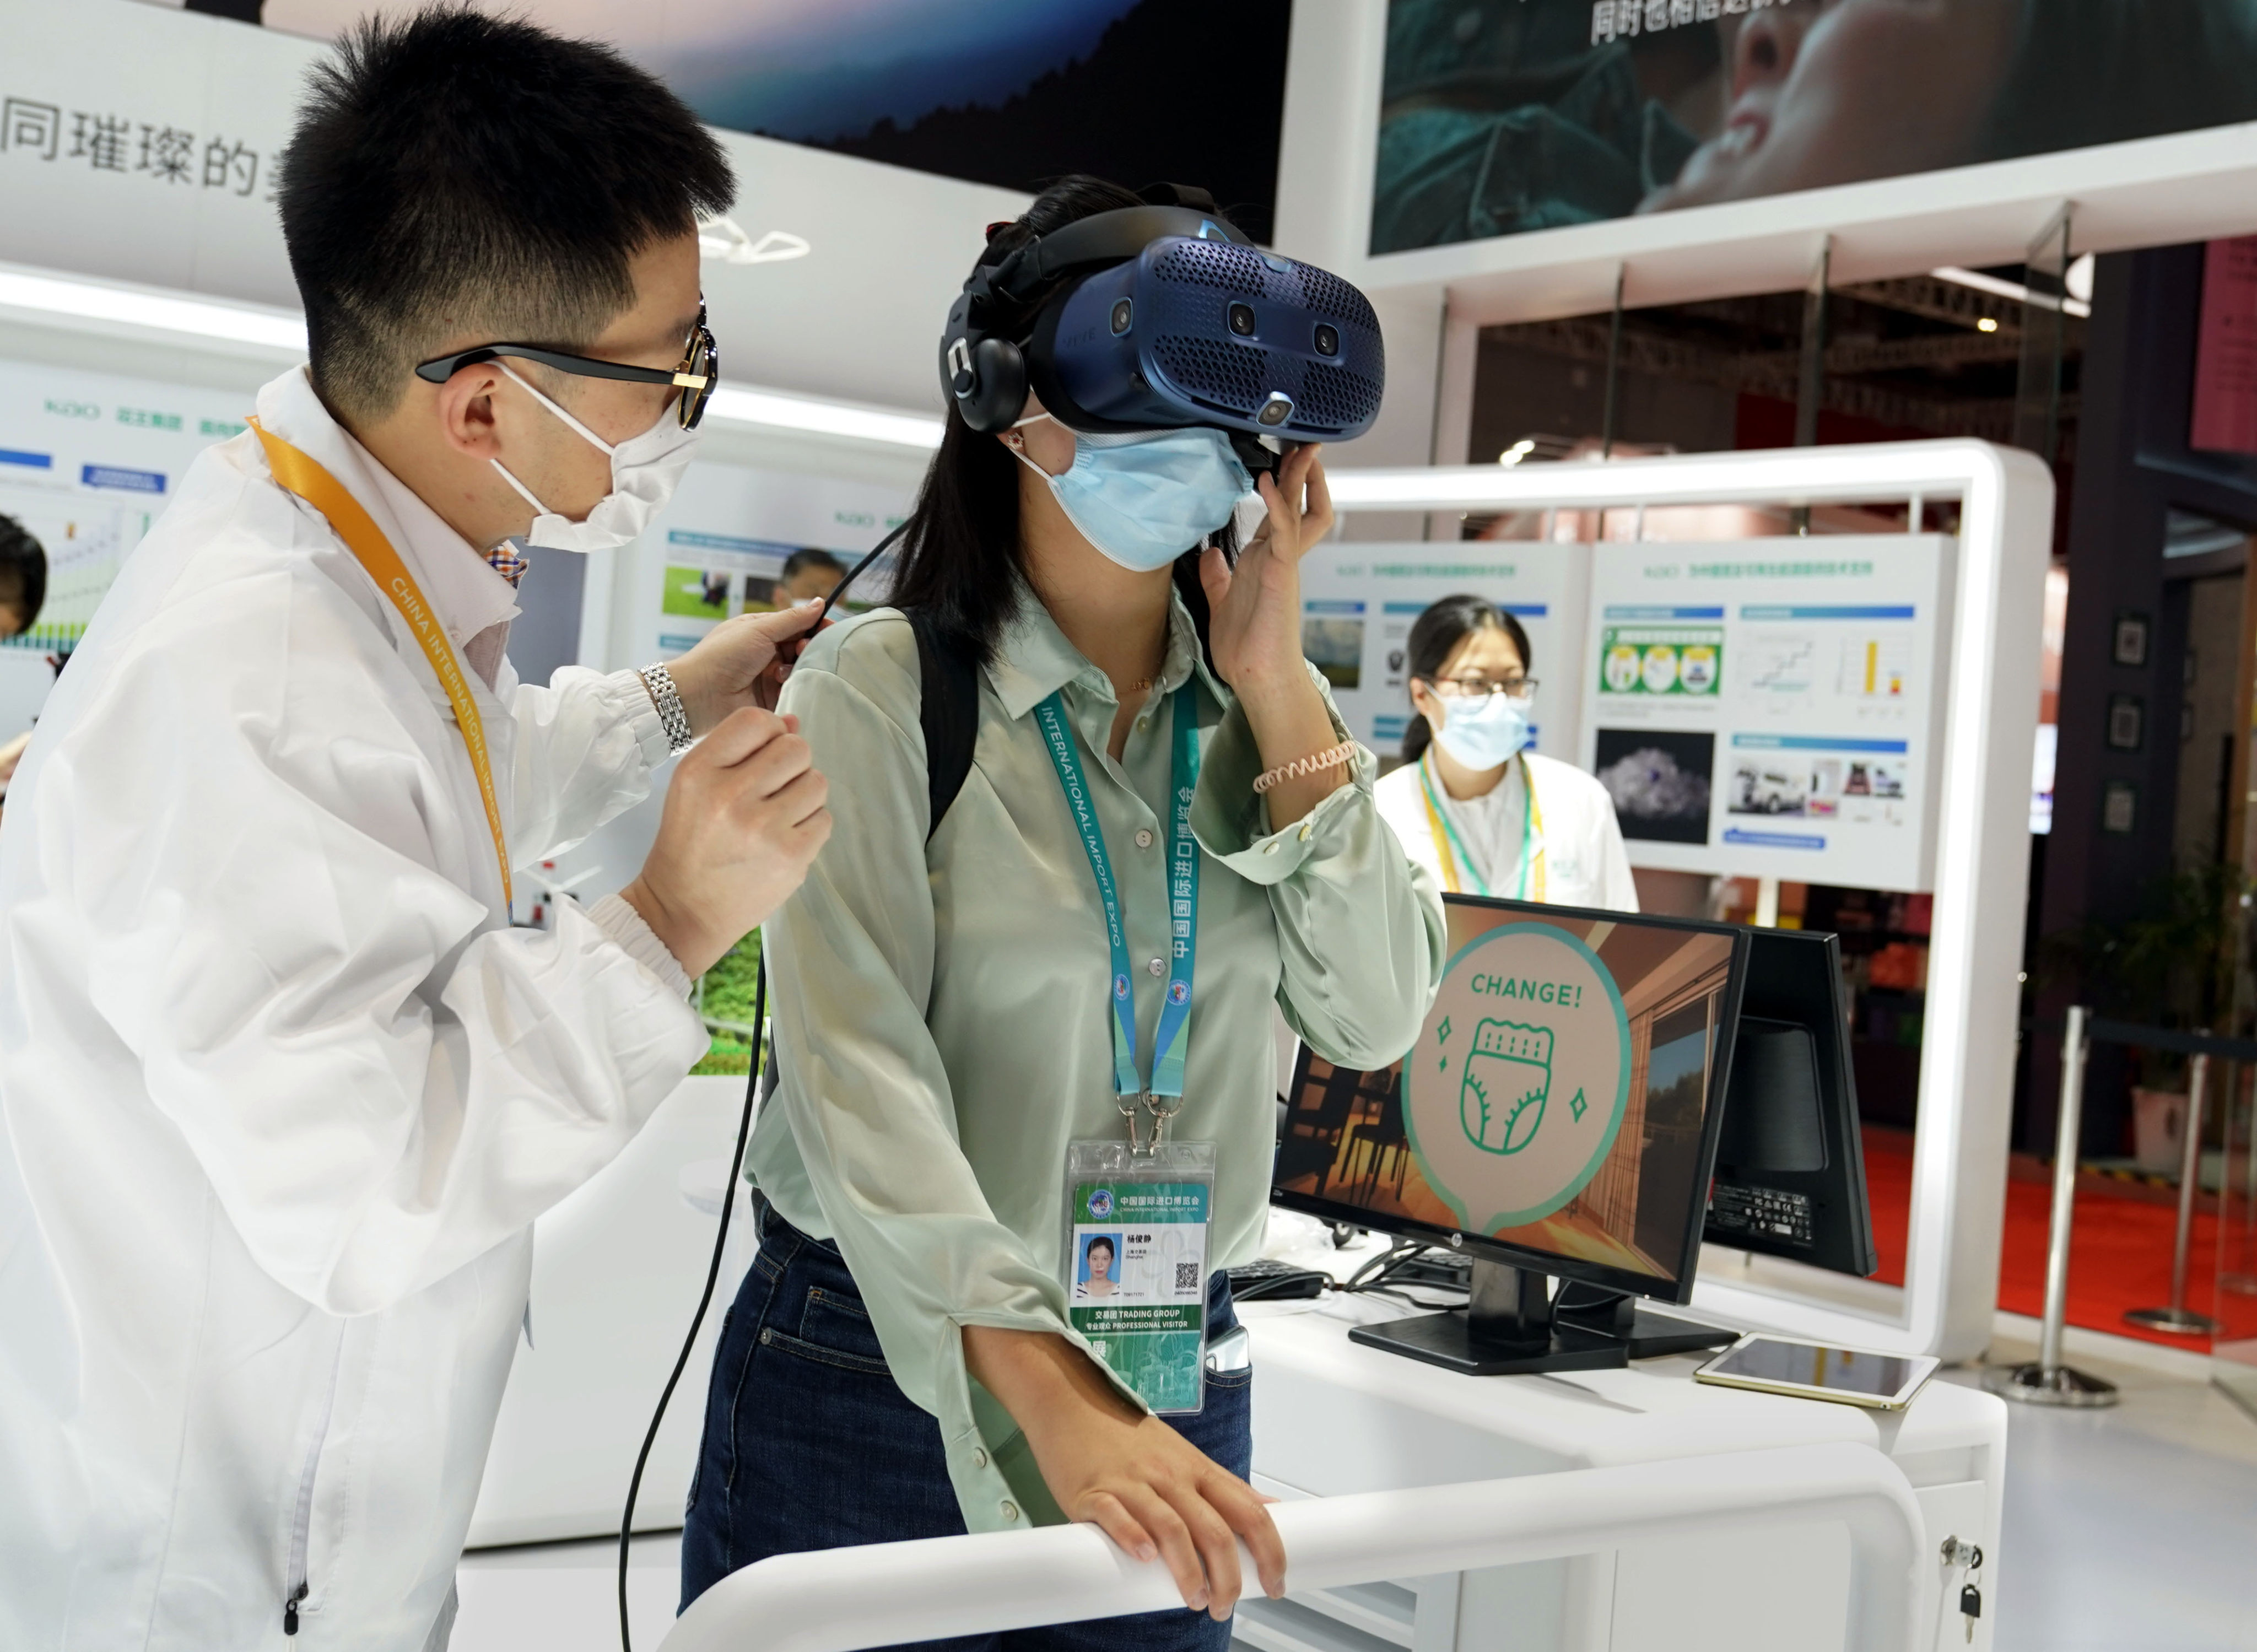 A visitor experiences a virtual reality headset at the 4th China International Import Expo in Shanghai on November 6. China’s innovative economy is mostly market-oriented rather than state-driven. Photo: Xinhua